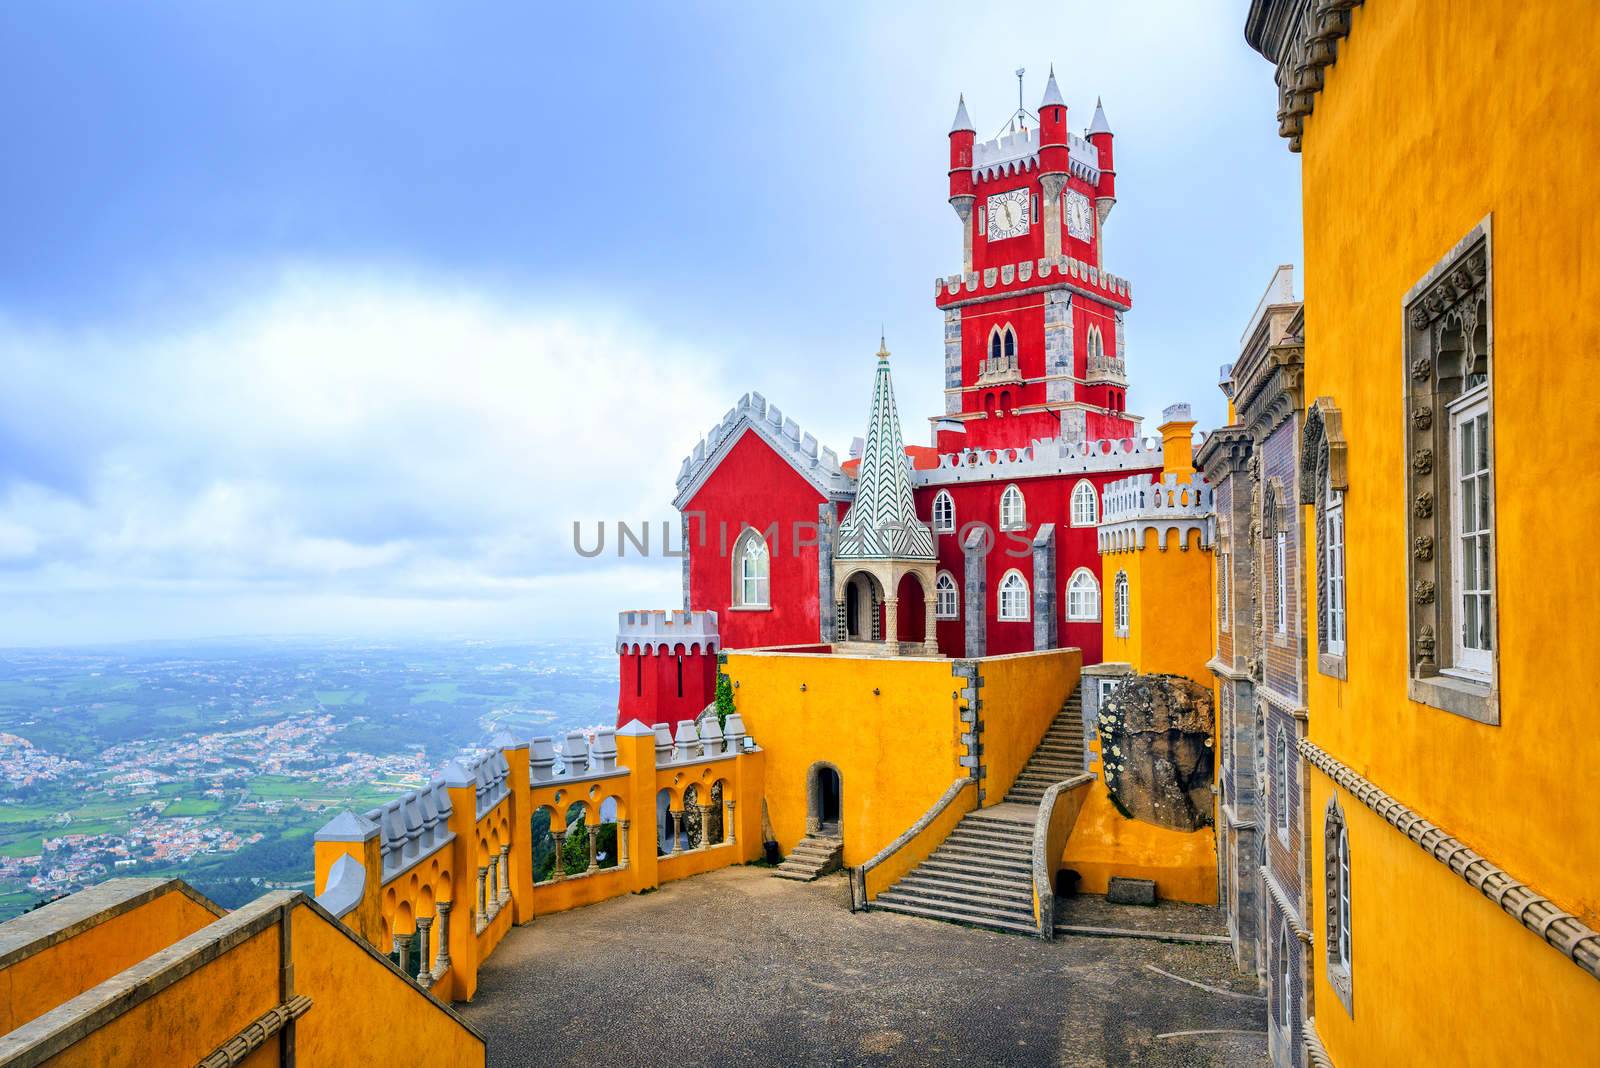 Inner court of Pena Palace, Sintra, Portugal